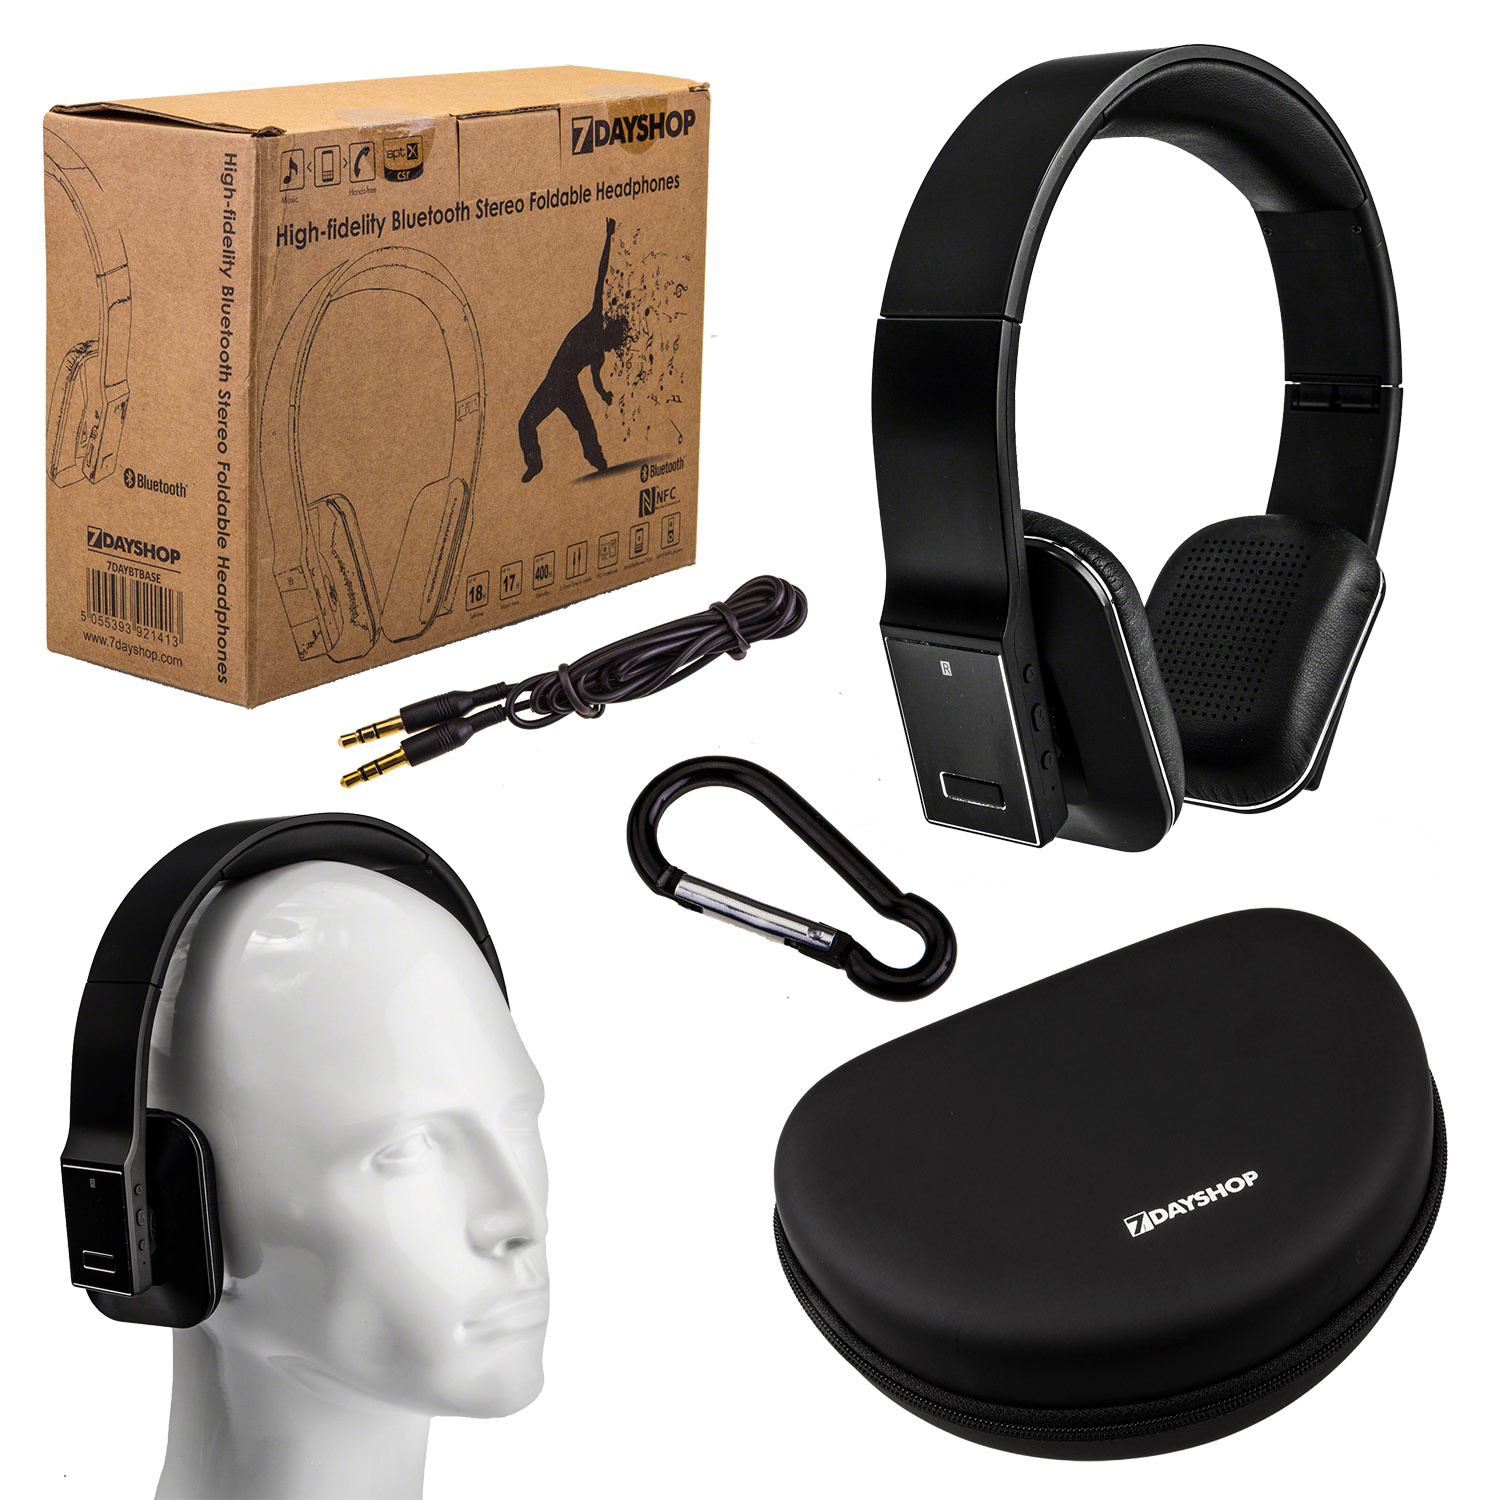 7dayshop R7 Wireless Bluetooth 4.0 aptX Stereo Headphones With Hands Free Mic And Travel Case